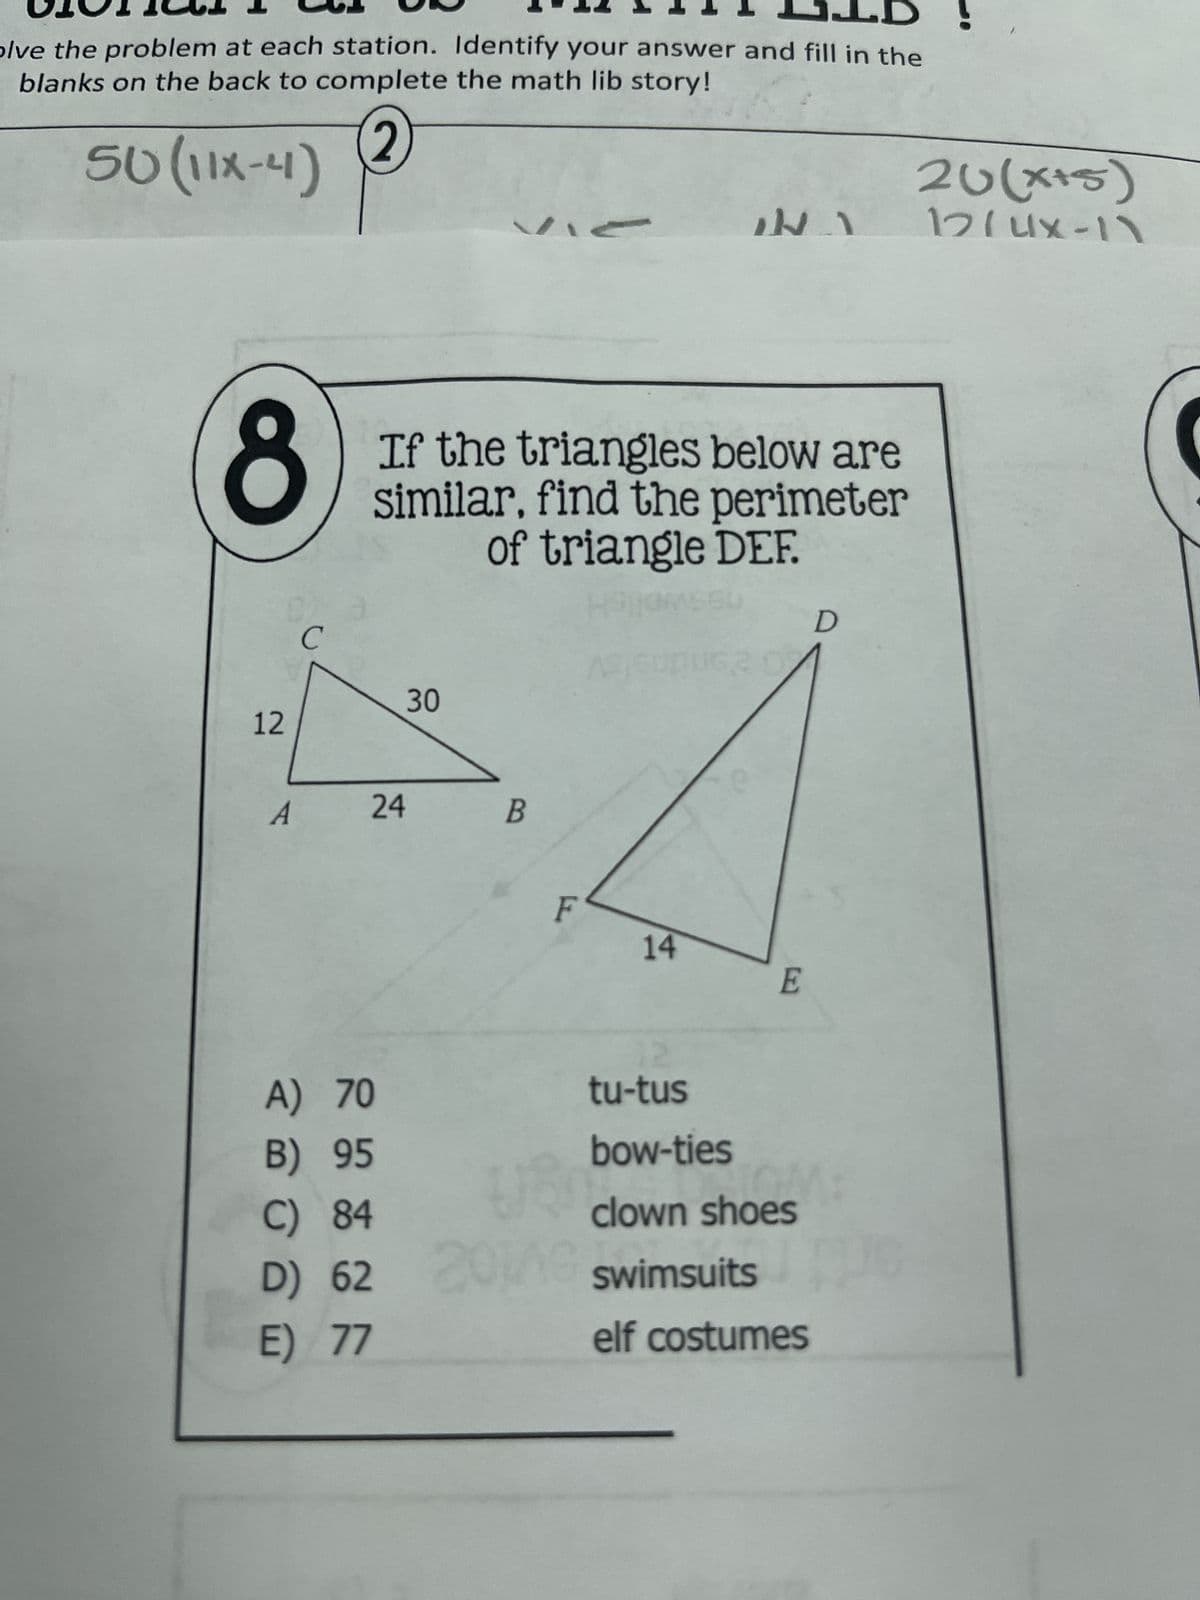 10011
LIB!
olve the problem at each station. Identify your answer and fill in the
blanks on the back to complete the math lib story!
50 (11x-4)
2
8
C
26(x+5)
1
12(4x-11
If the triangles below are
similar, find the perimeter
of triangle DEF.
30
12
24
B
A
F
14
E
12
A) 70
tu-tus
B) 95
bow-ties
C) 84
clown shoes
D) 62
20149 swimsuits
E) 77
elf costumes
D